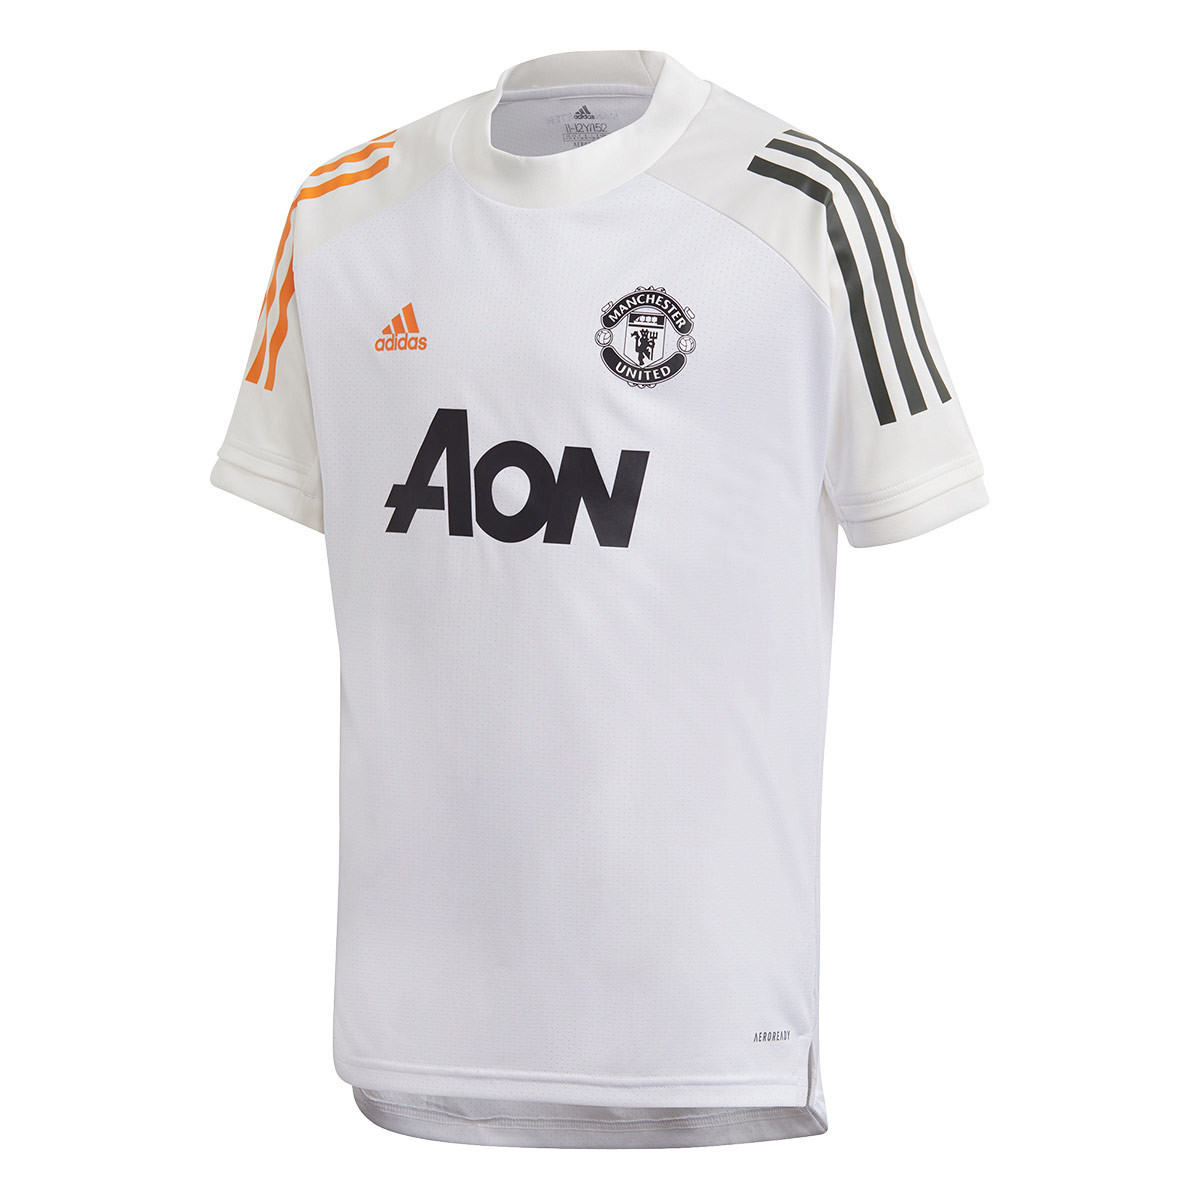 jersey manchester united